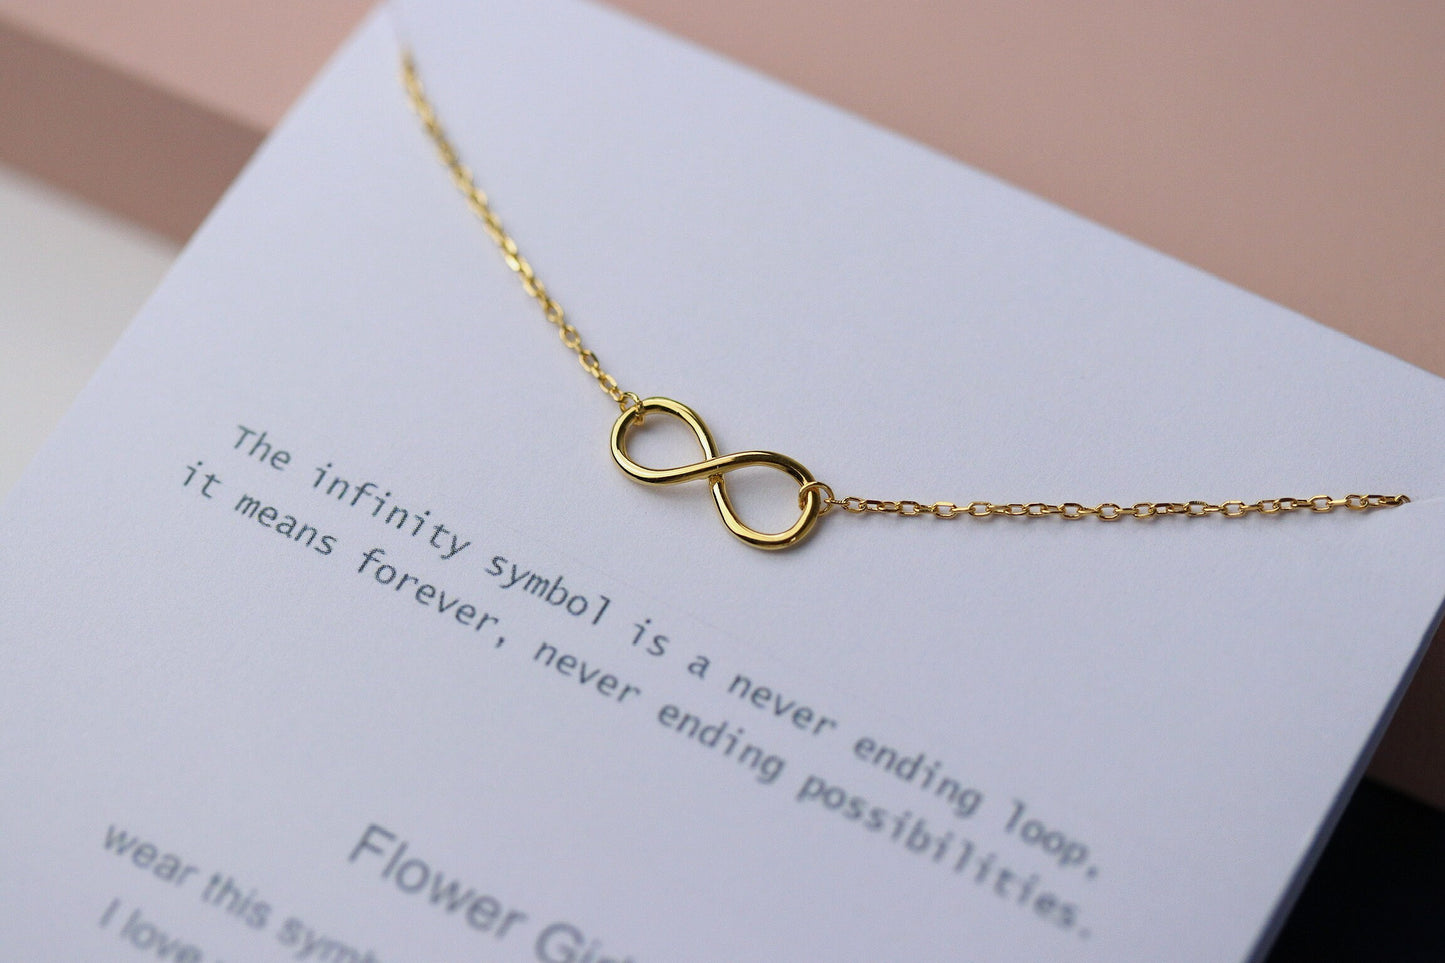 Flower Girl Gift / Wedding Thank You Gift / Infinity Necklace / Gold Dainty Necklace Jewelry Gift for Flower Girl, Keepsake Flower Girl Gift